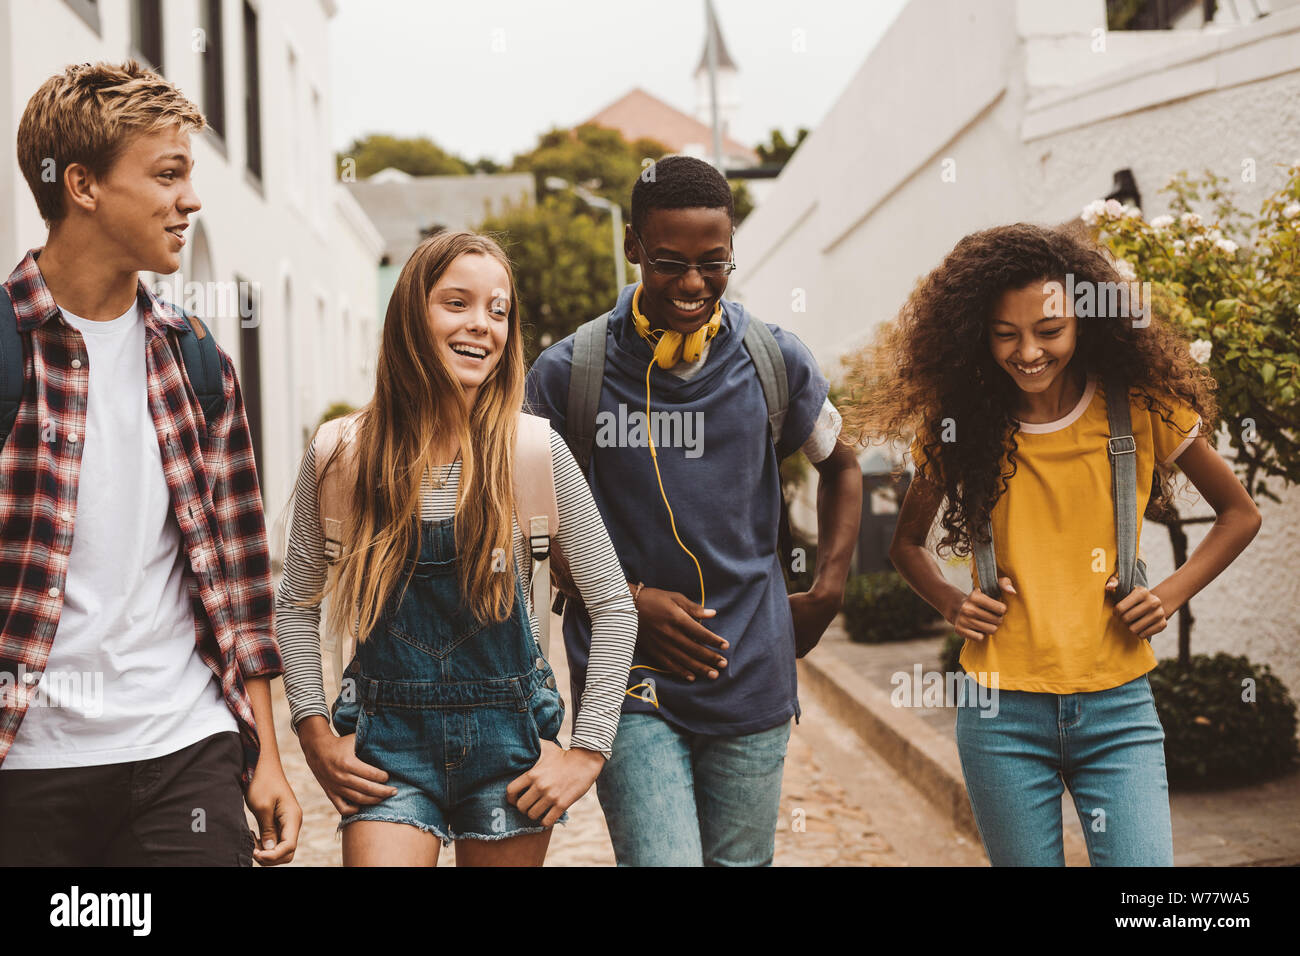 Group of multiethnic college friends walking in the street. Smiling teenage friends wearing college bags walking outdoors and talking. Stock Photo